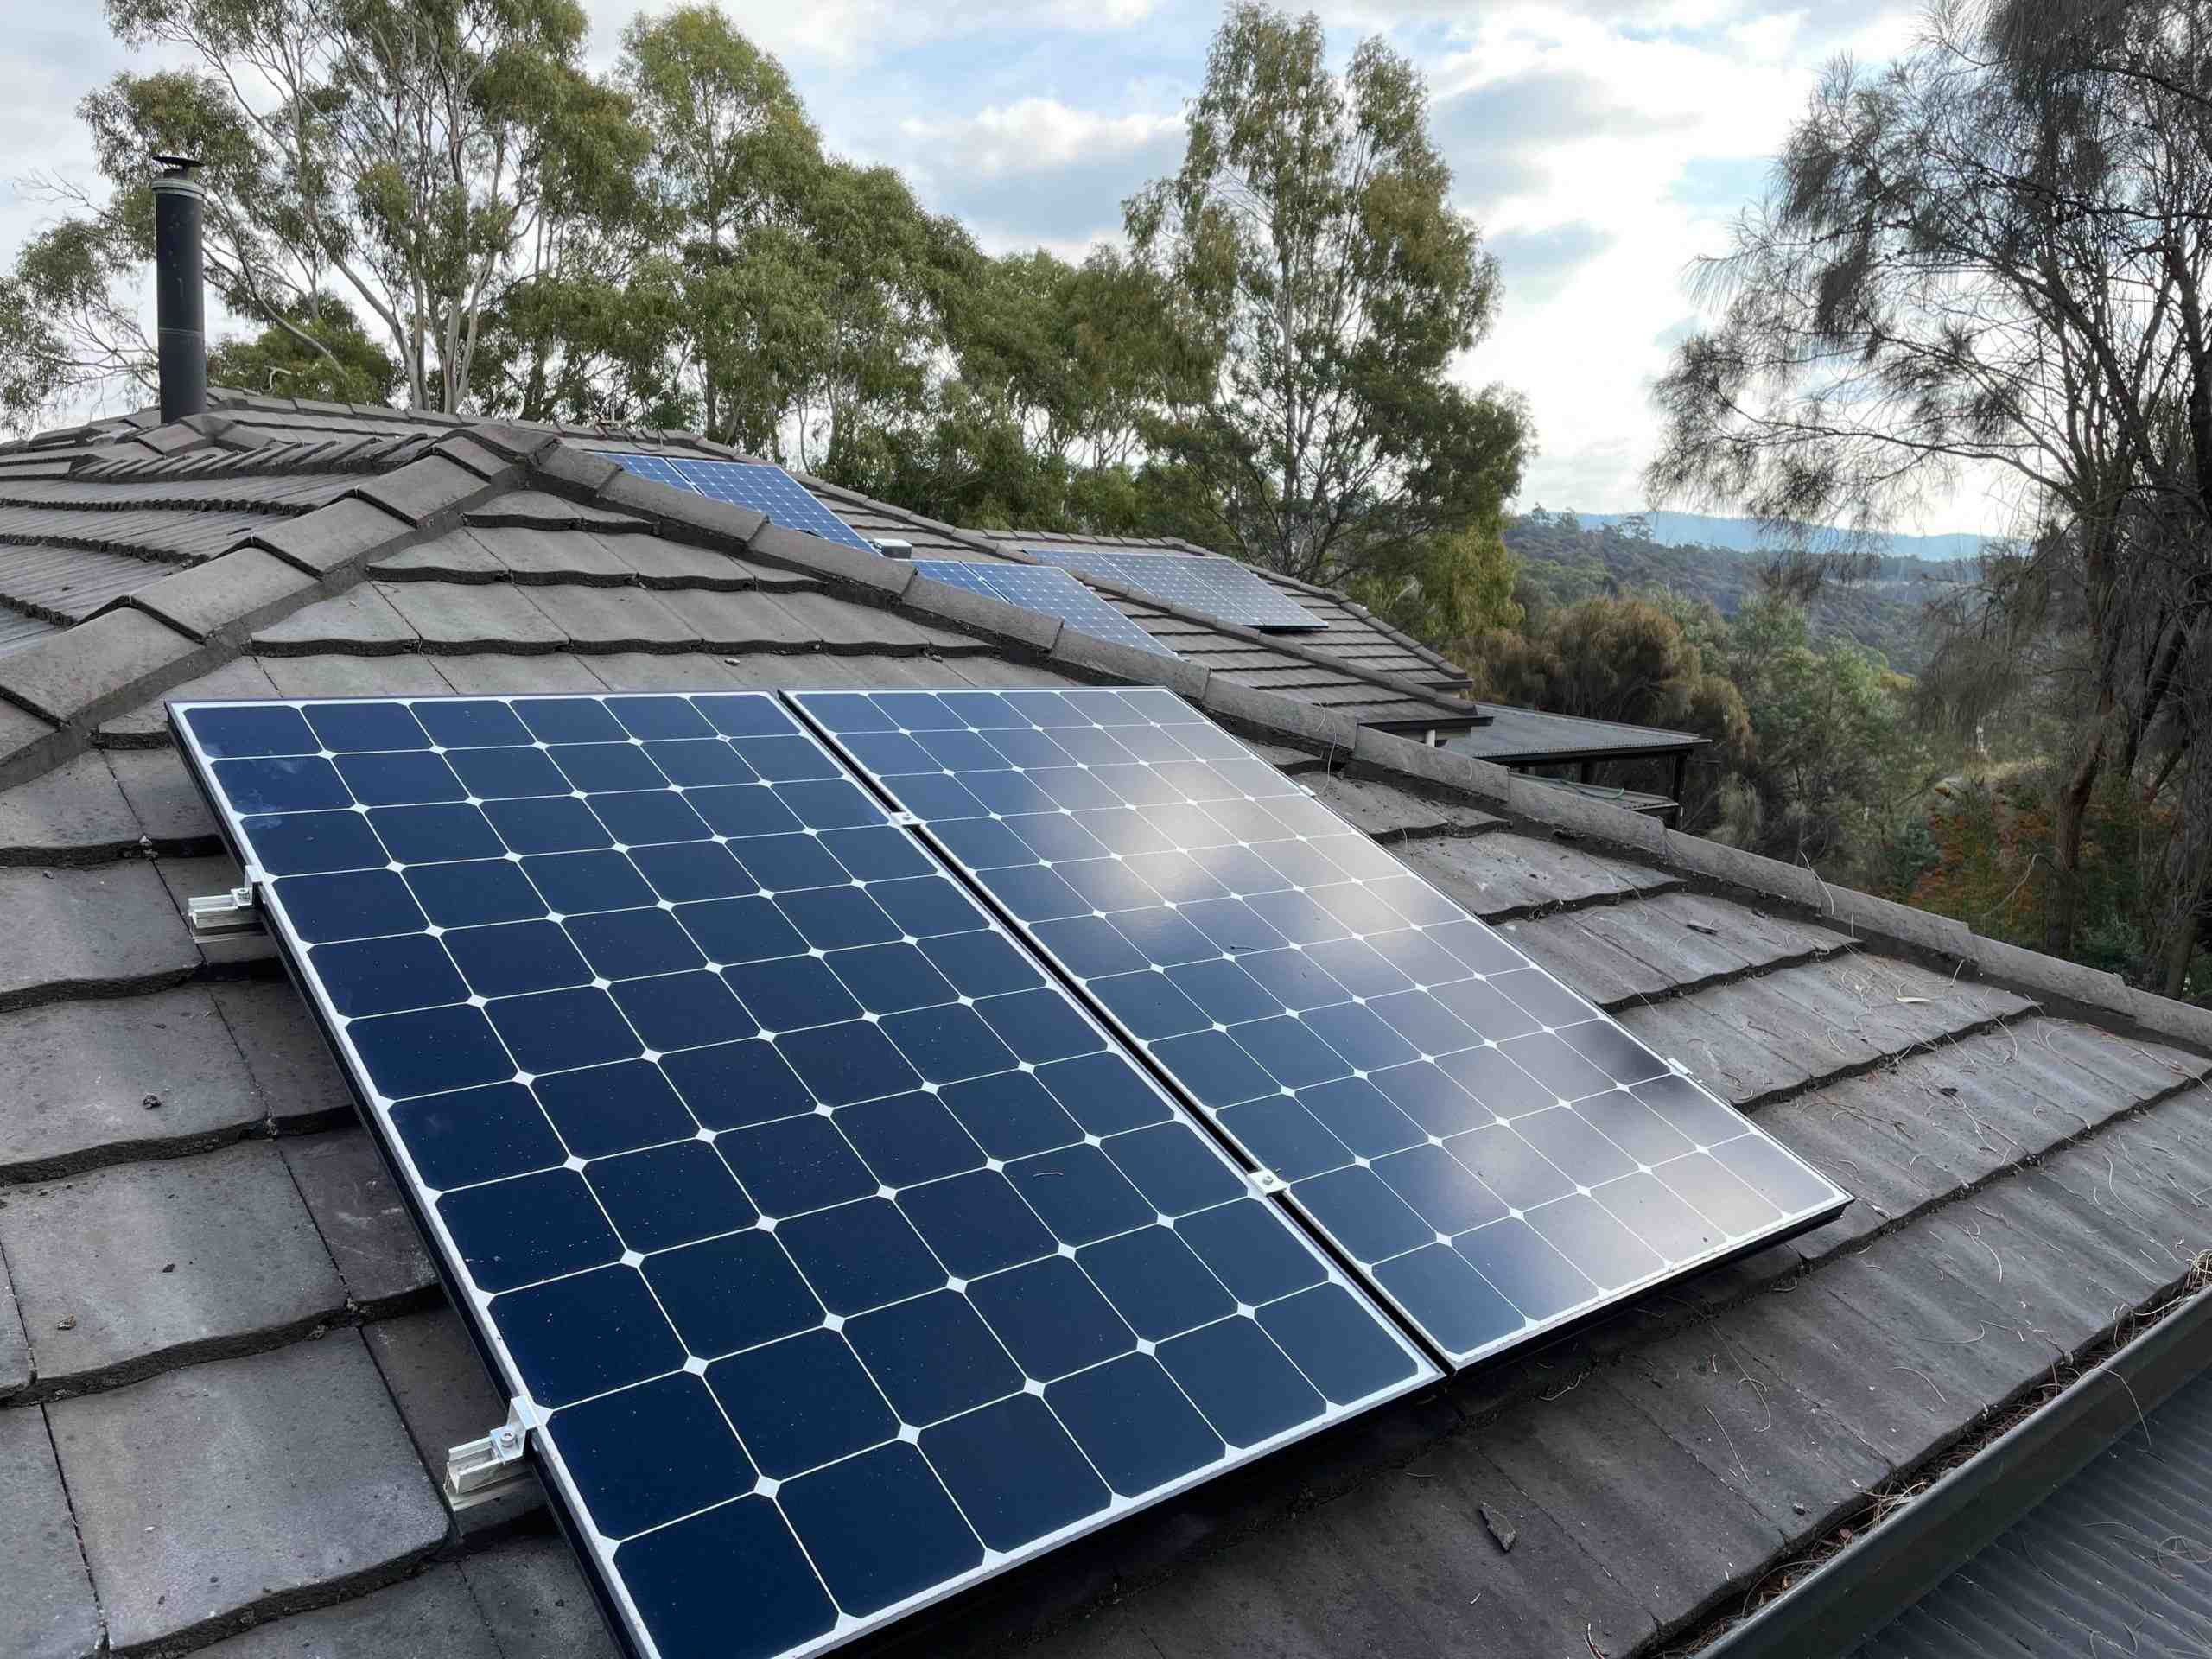 Does SunPower install their own panels?